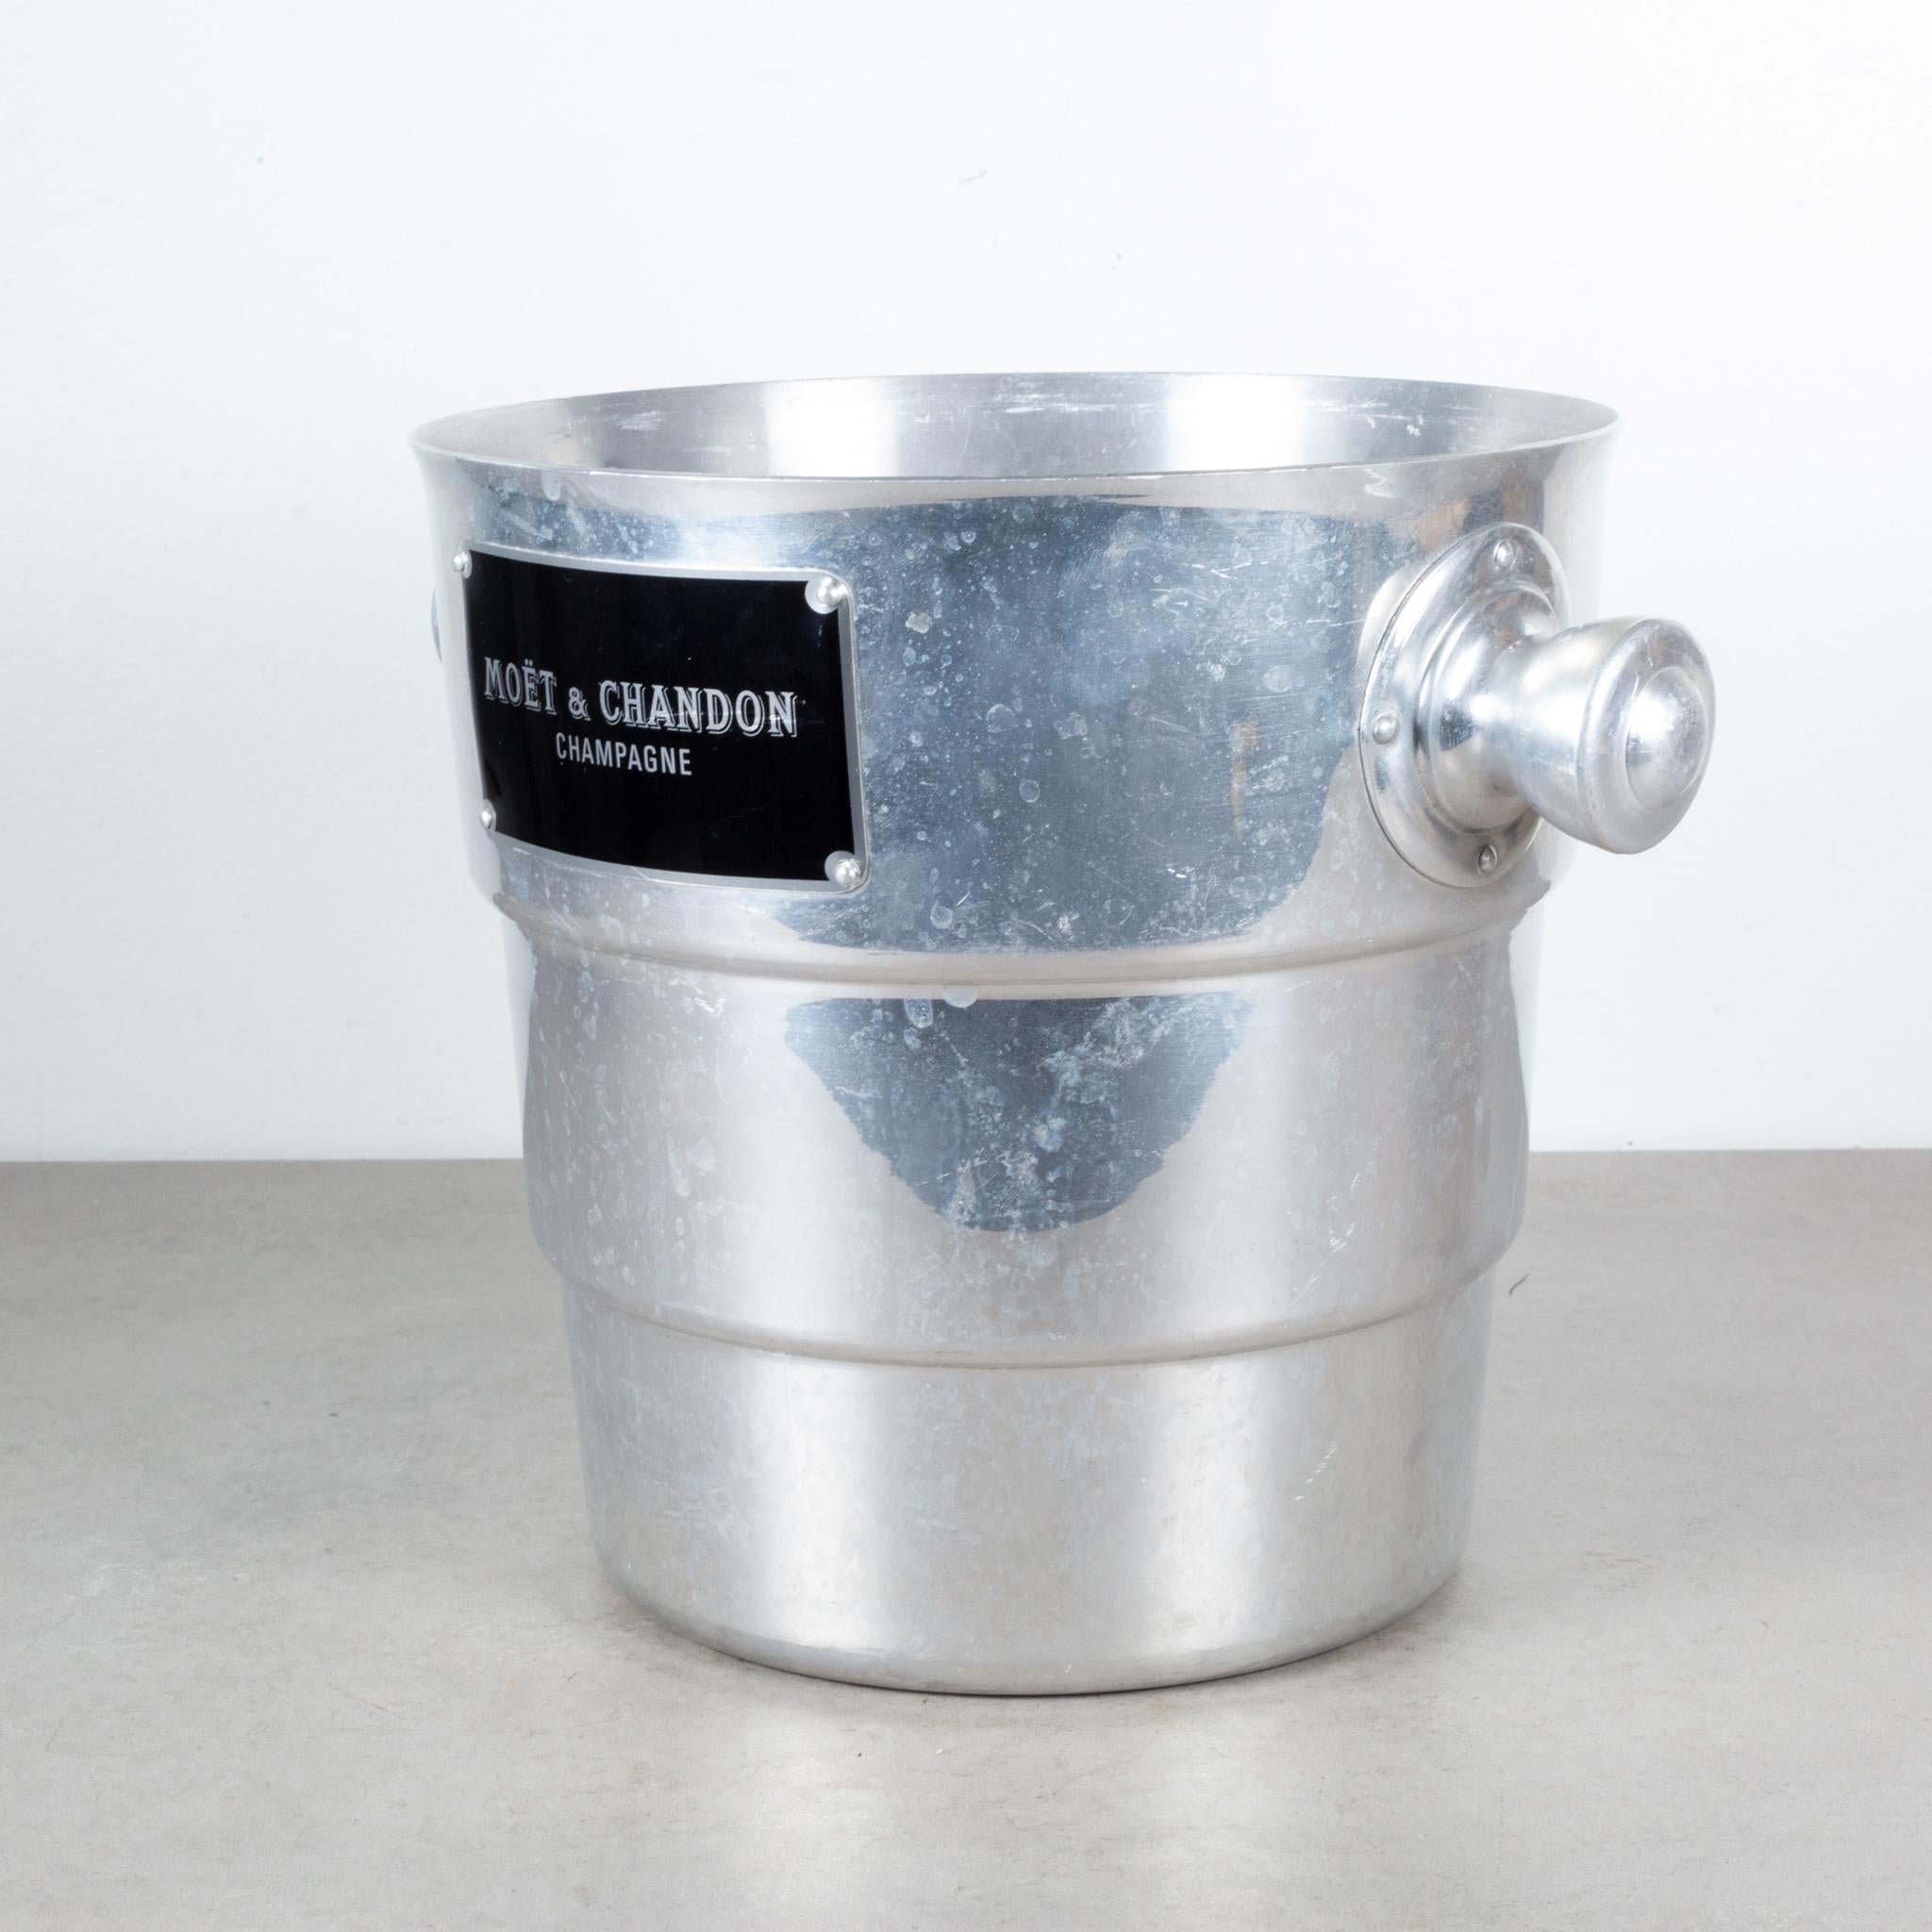 ABOUT

An original aluminum champagne ice bucket with metal Moet & Chandon plate and handles.

    CREATOR Selecto Lot, Made in Belgium.
    DATE OF MANUFACTURE c.1940-1950.
    MATERIALS AND TECHNIQUES Aluminum, Metal.
    CONDITION Good. Wear